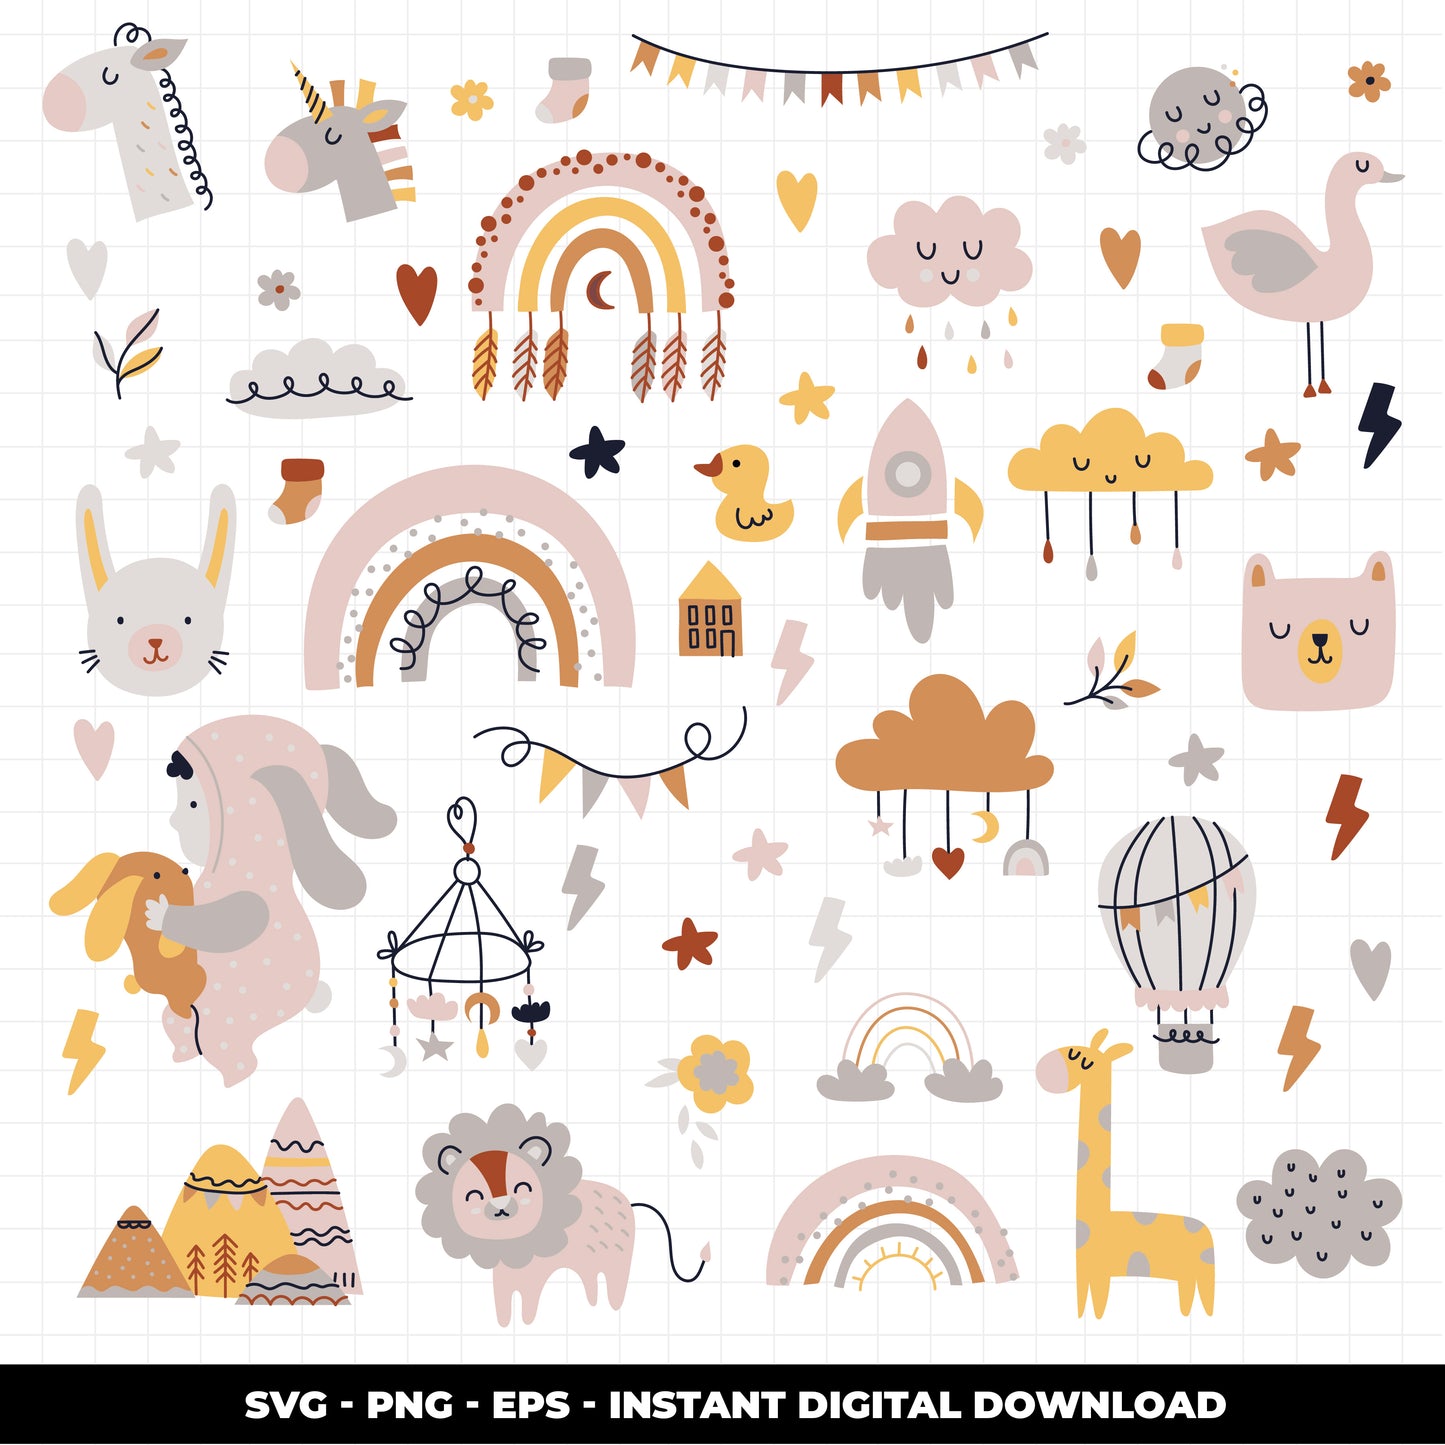 COD1140 Baby svg, baby doodle svg, baby png, baby clipart, unicorn baby svg